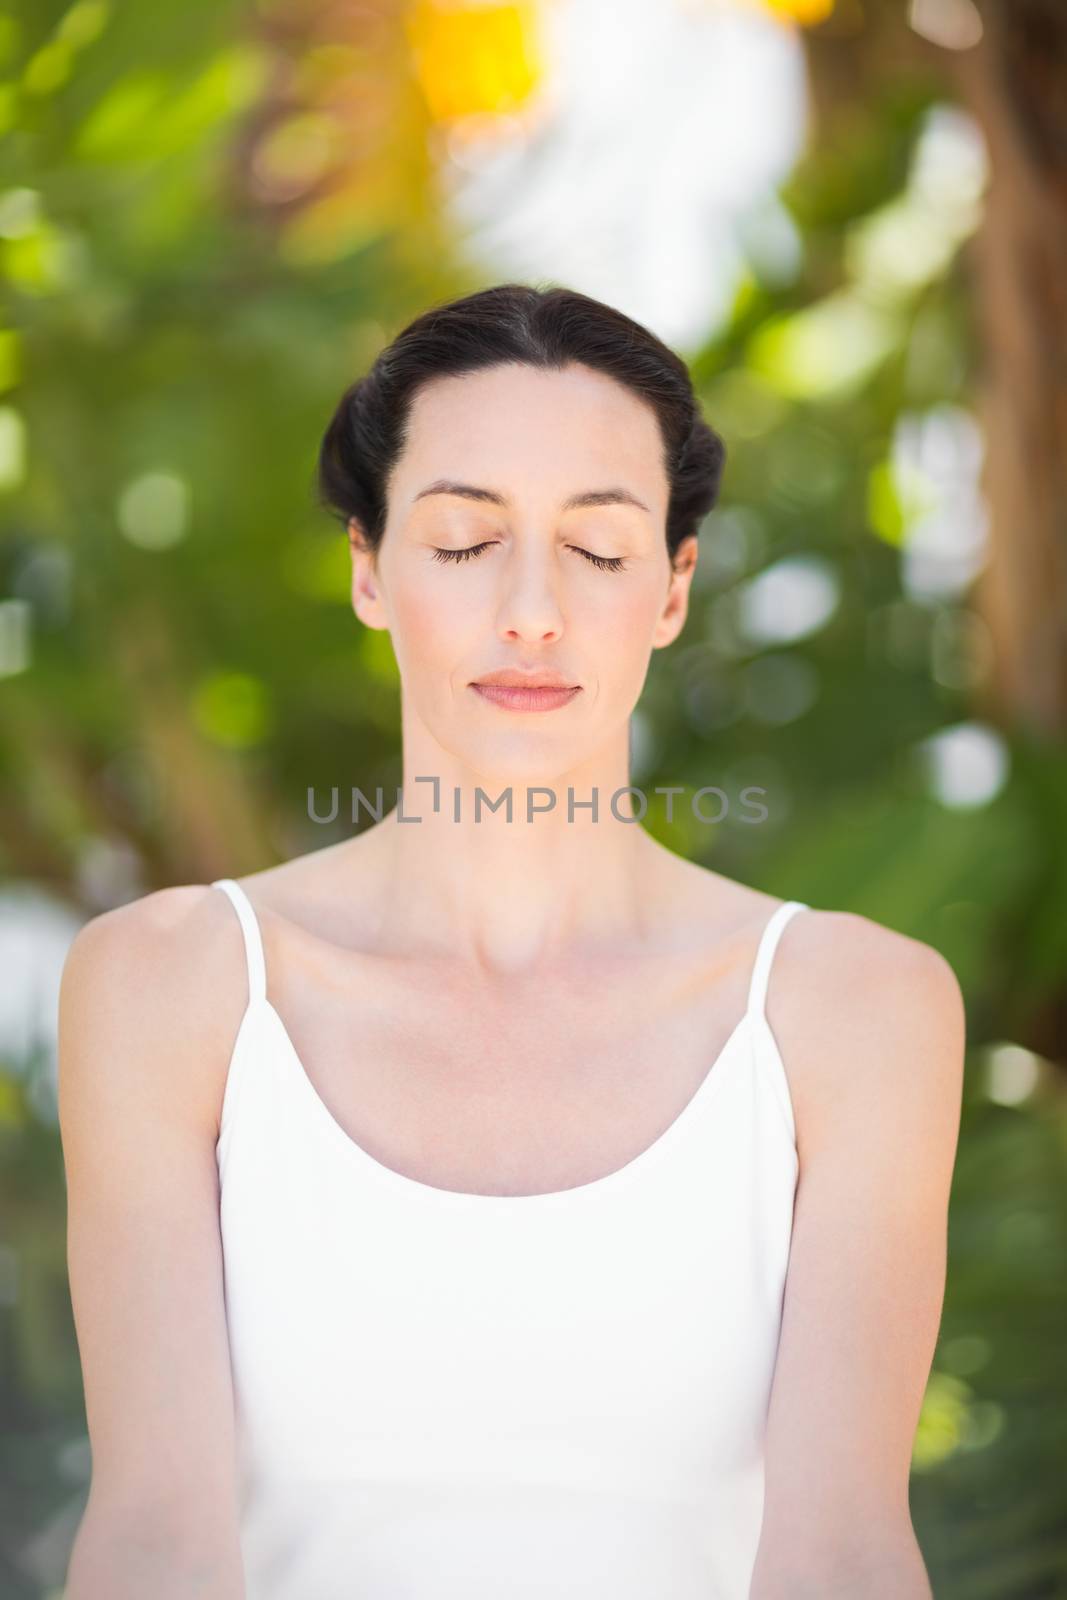 Portrait of a woman in a meditation position against a white background